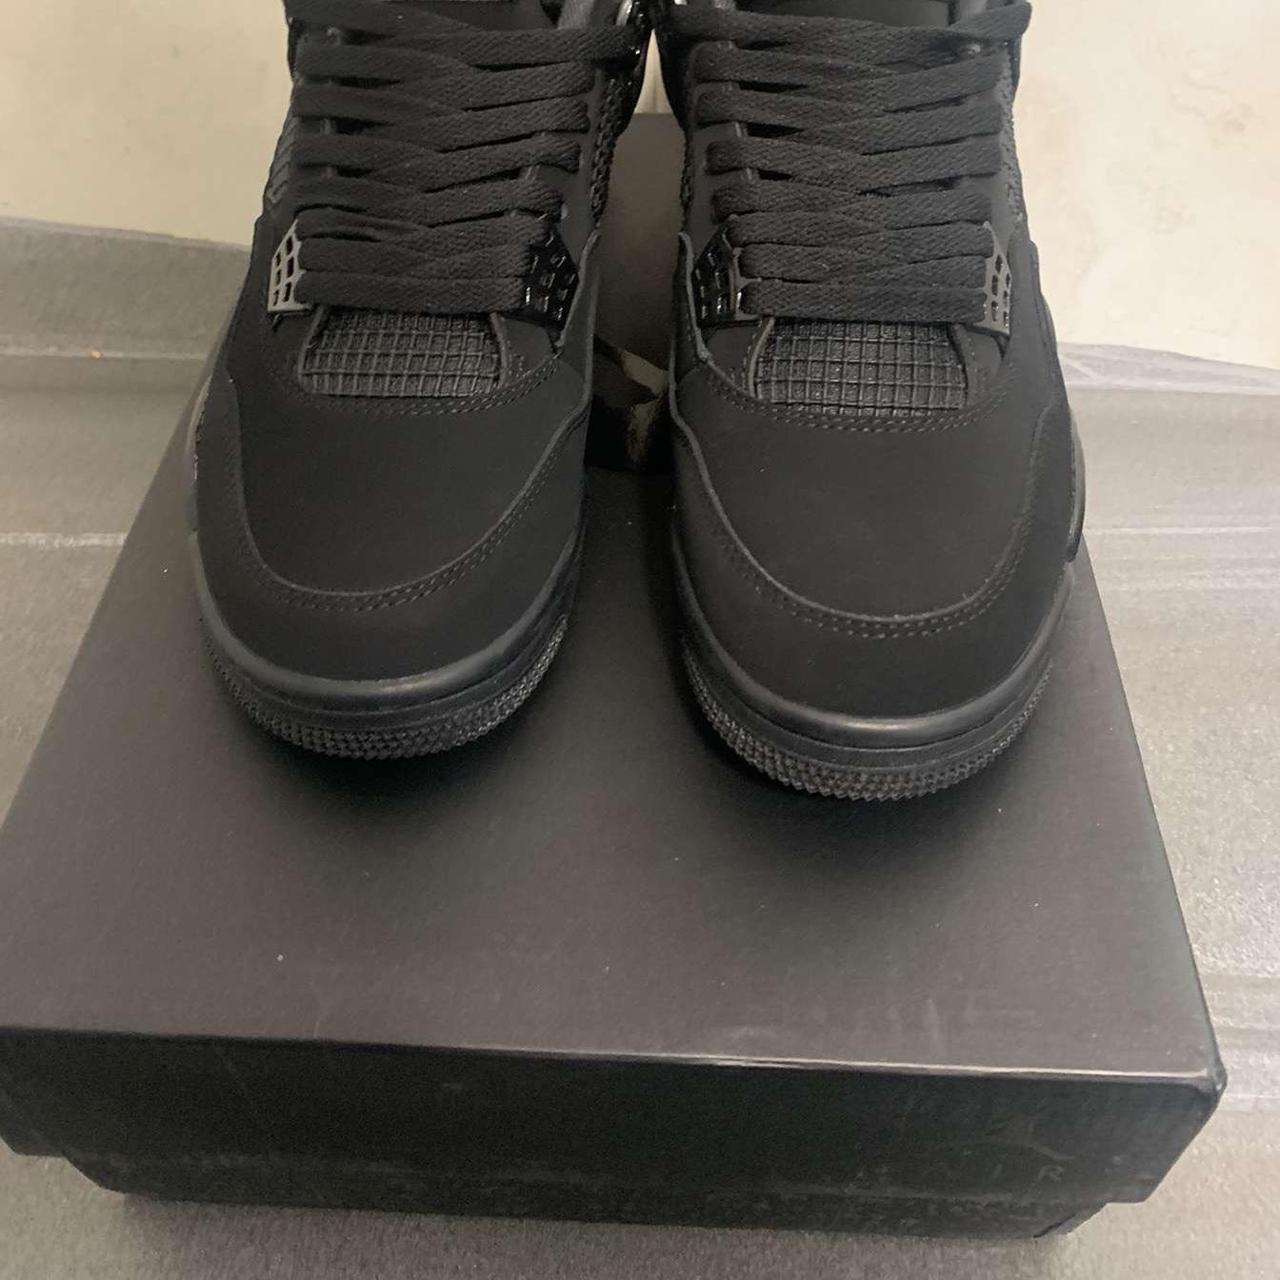 Jordan 4 black cats was given a gift selling as i... - Depop